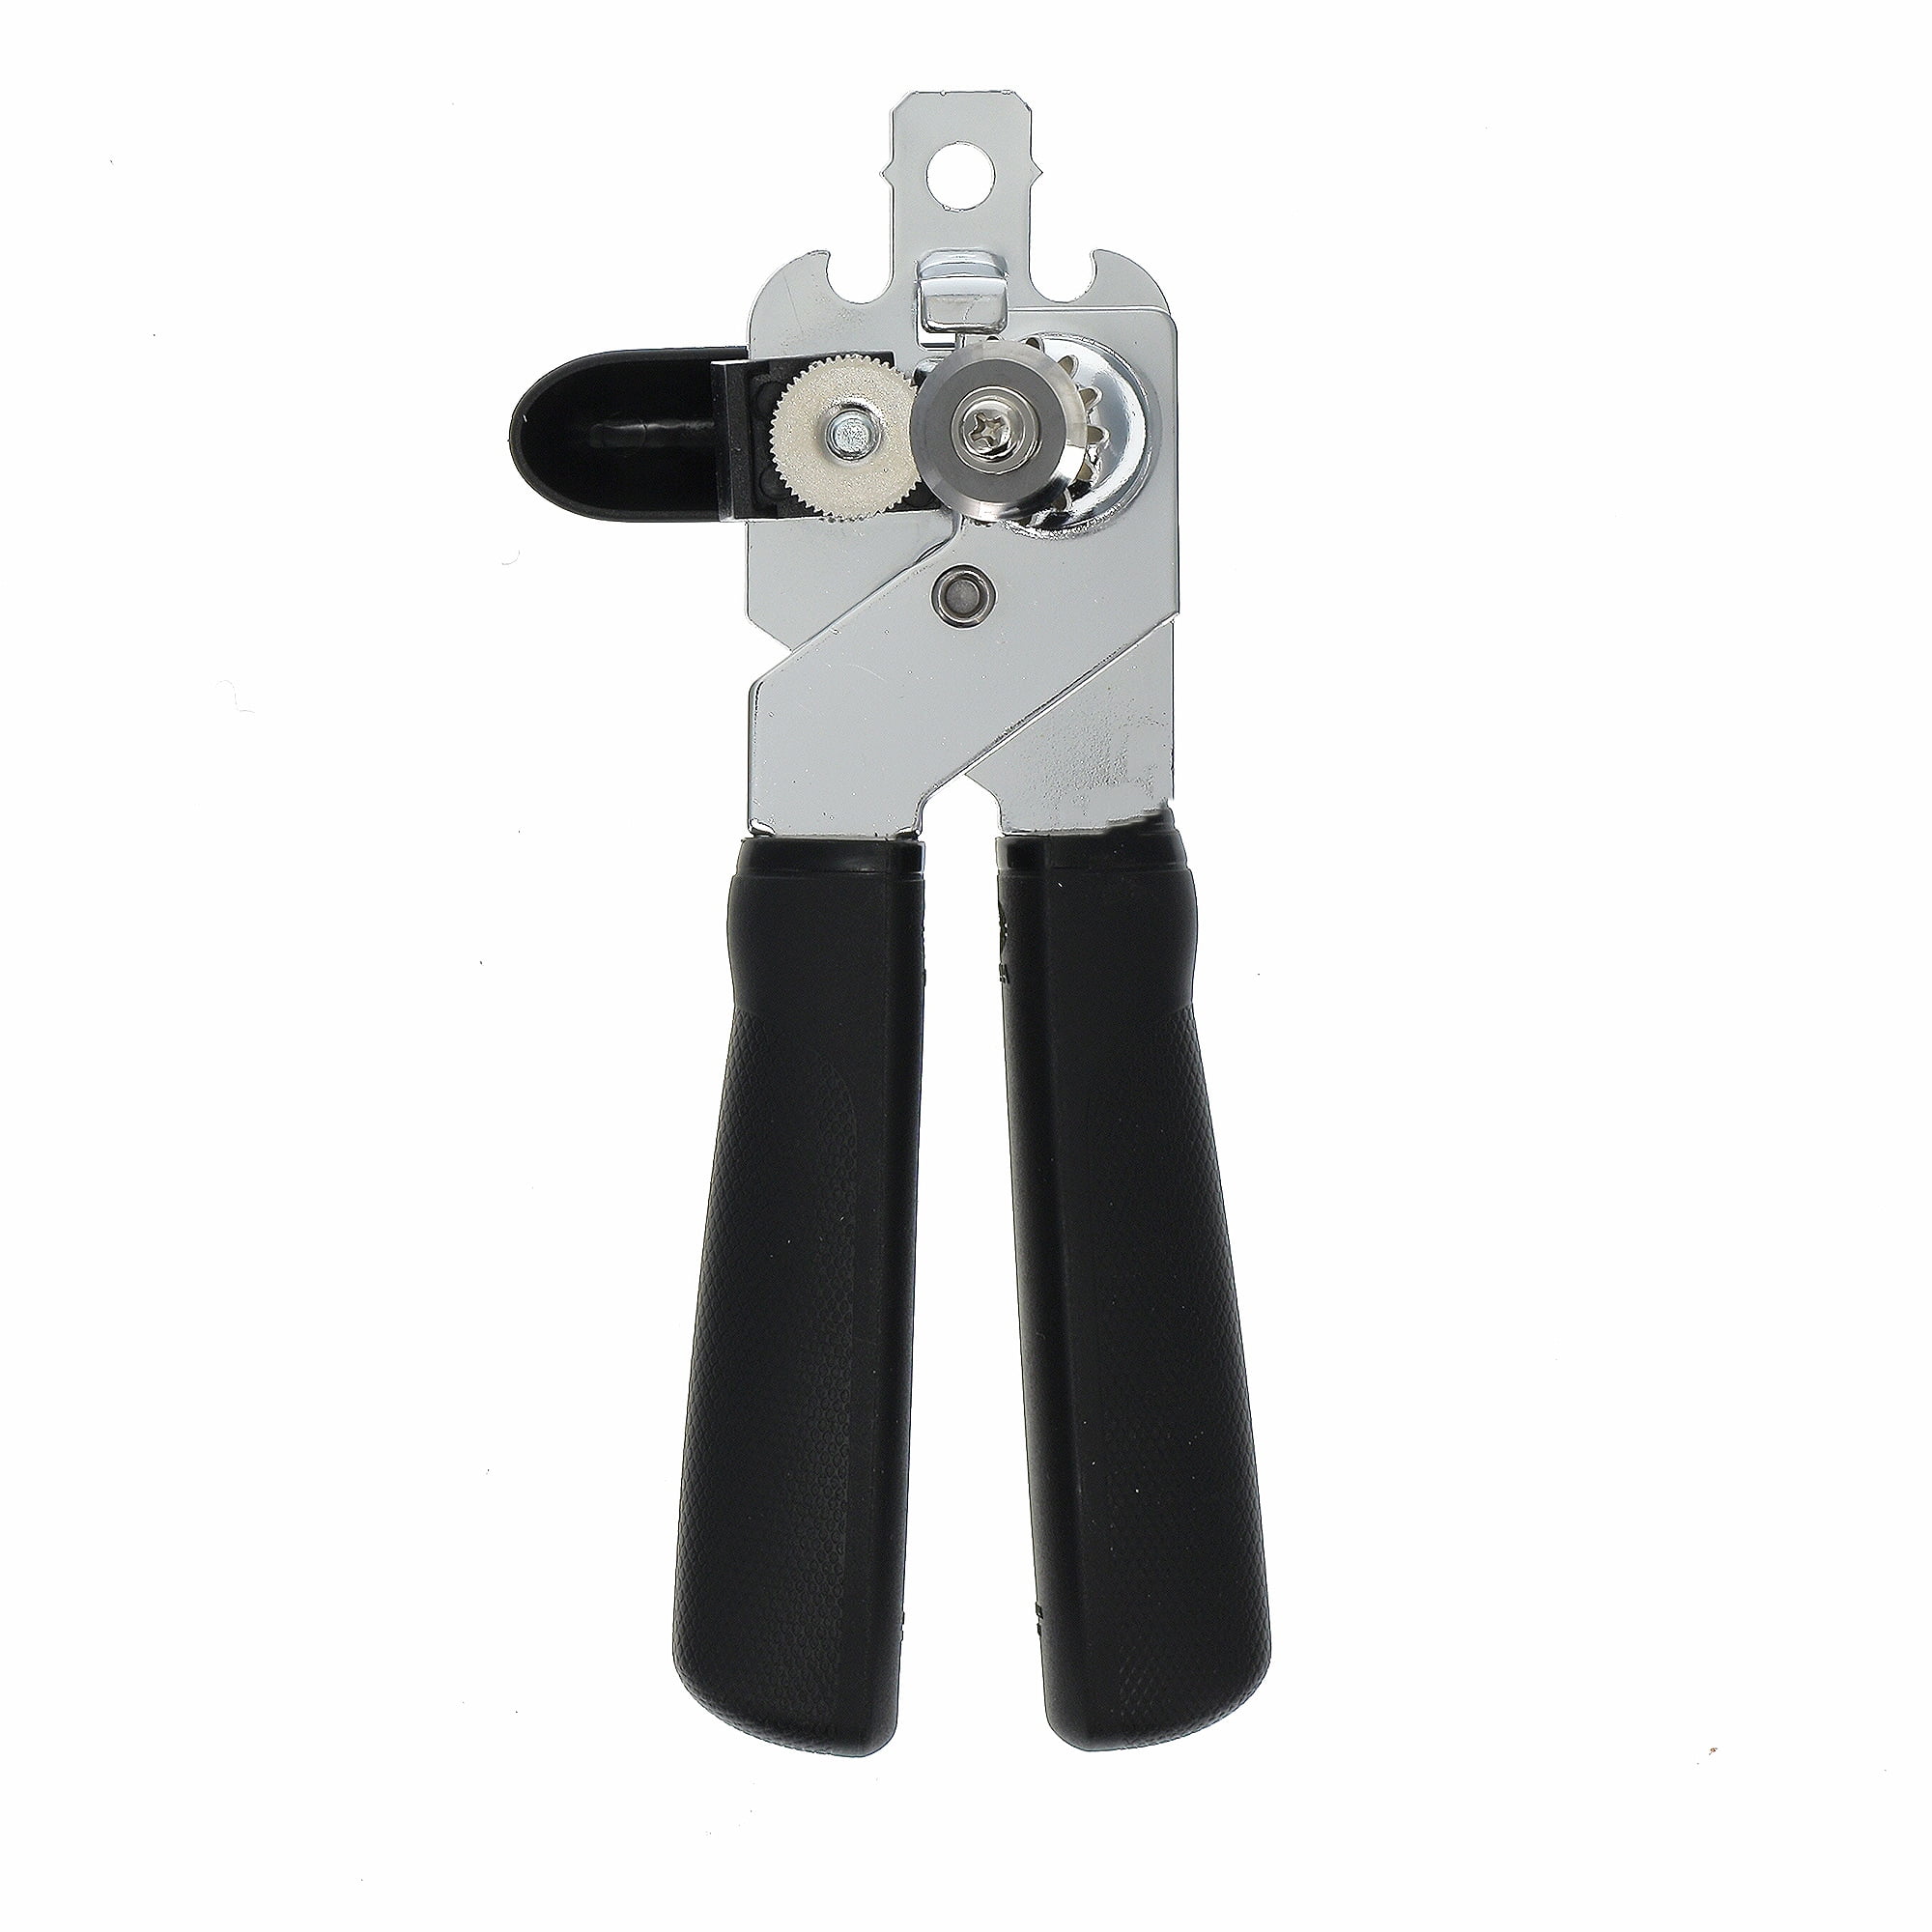 Mainstays 2 Ply Manual Can Opener with Integrated Bottle Opener